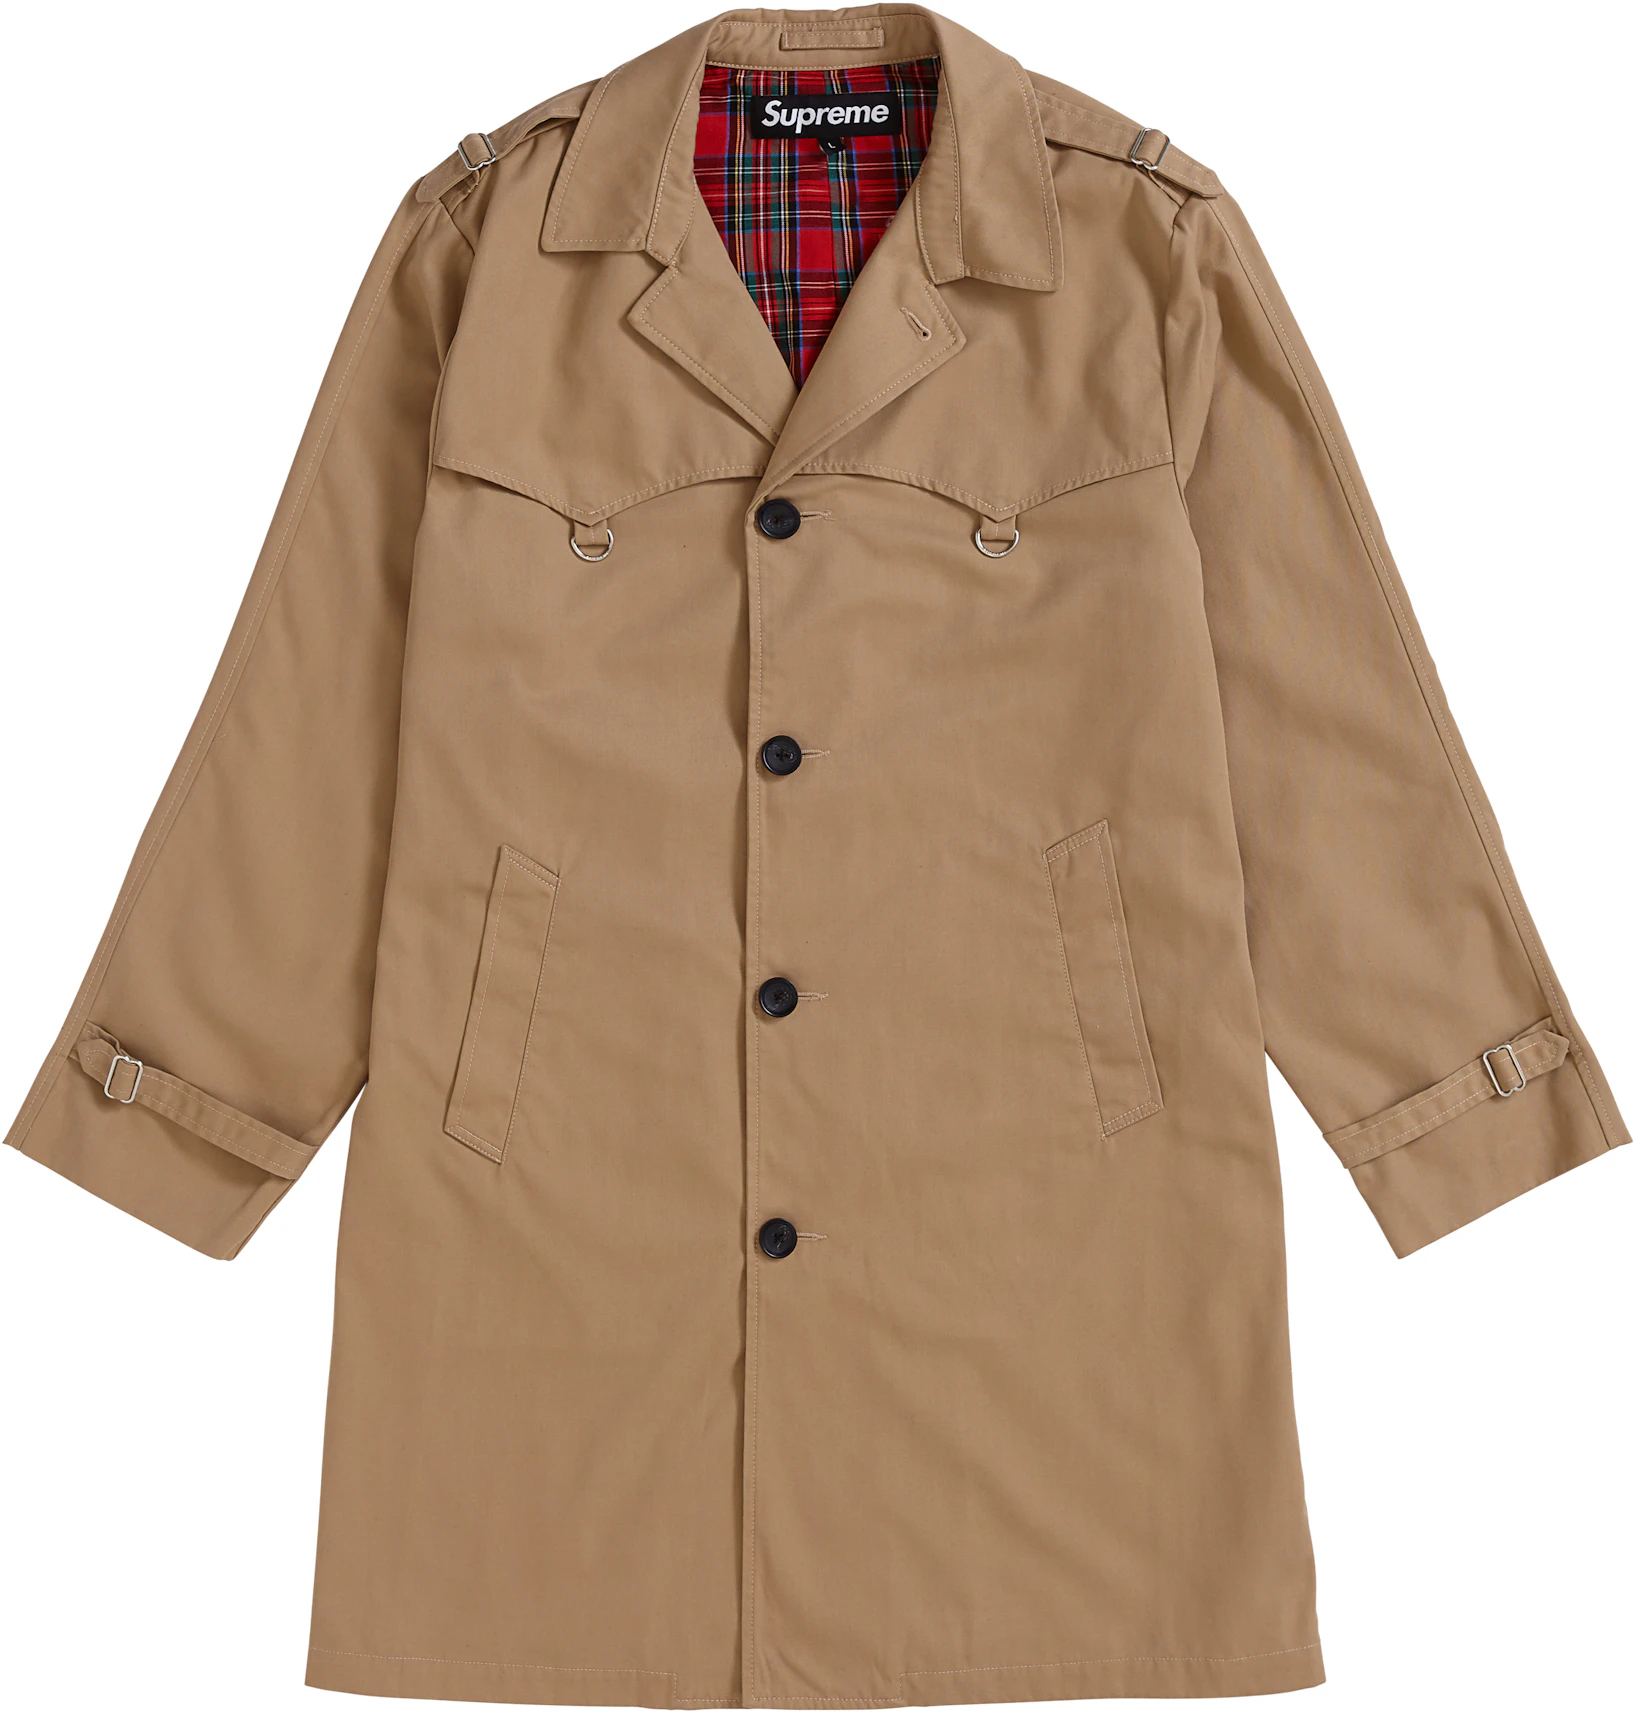 Supreme D-Ring Trench Coat Tan - SS19 - US